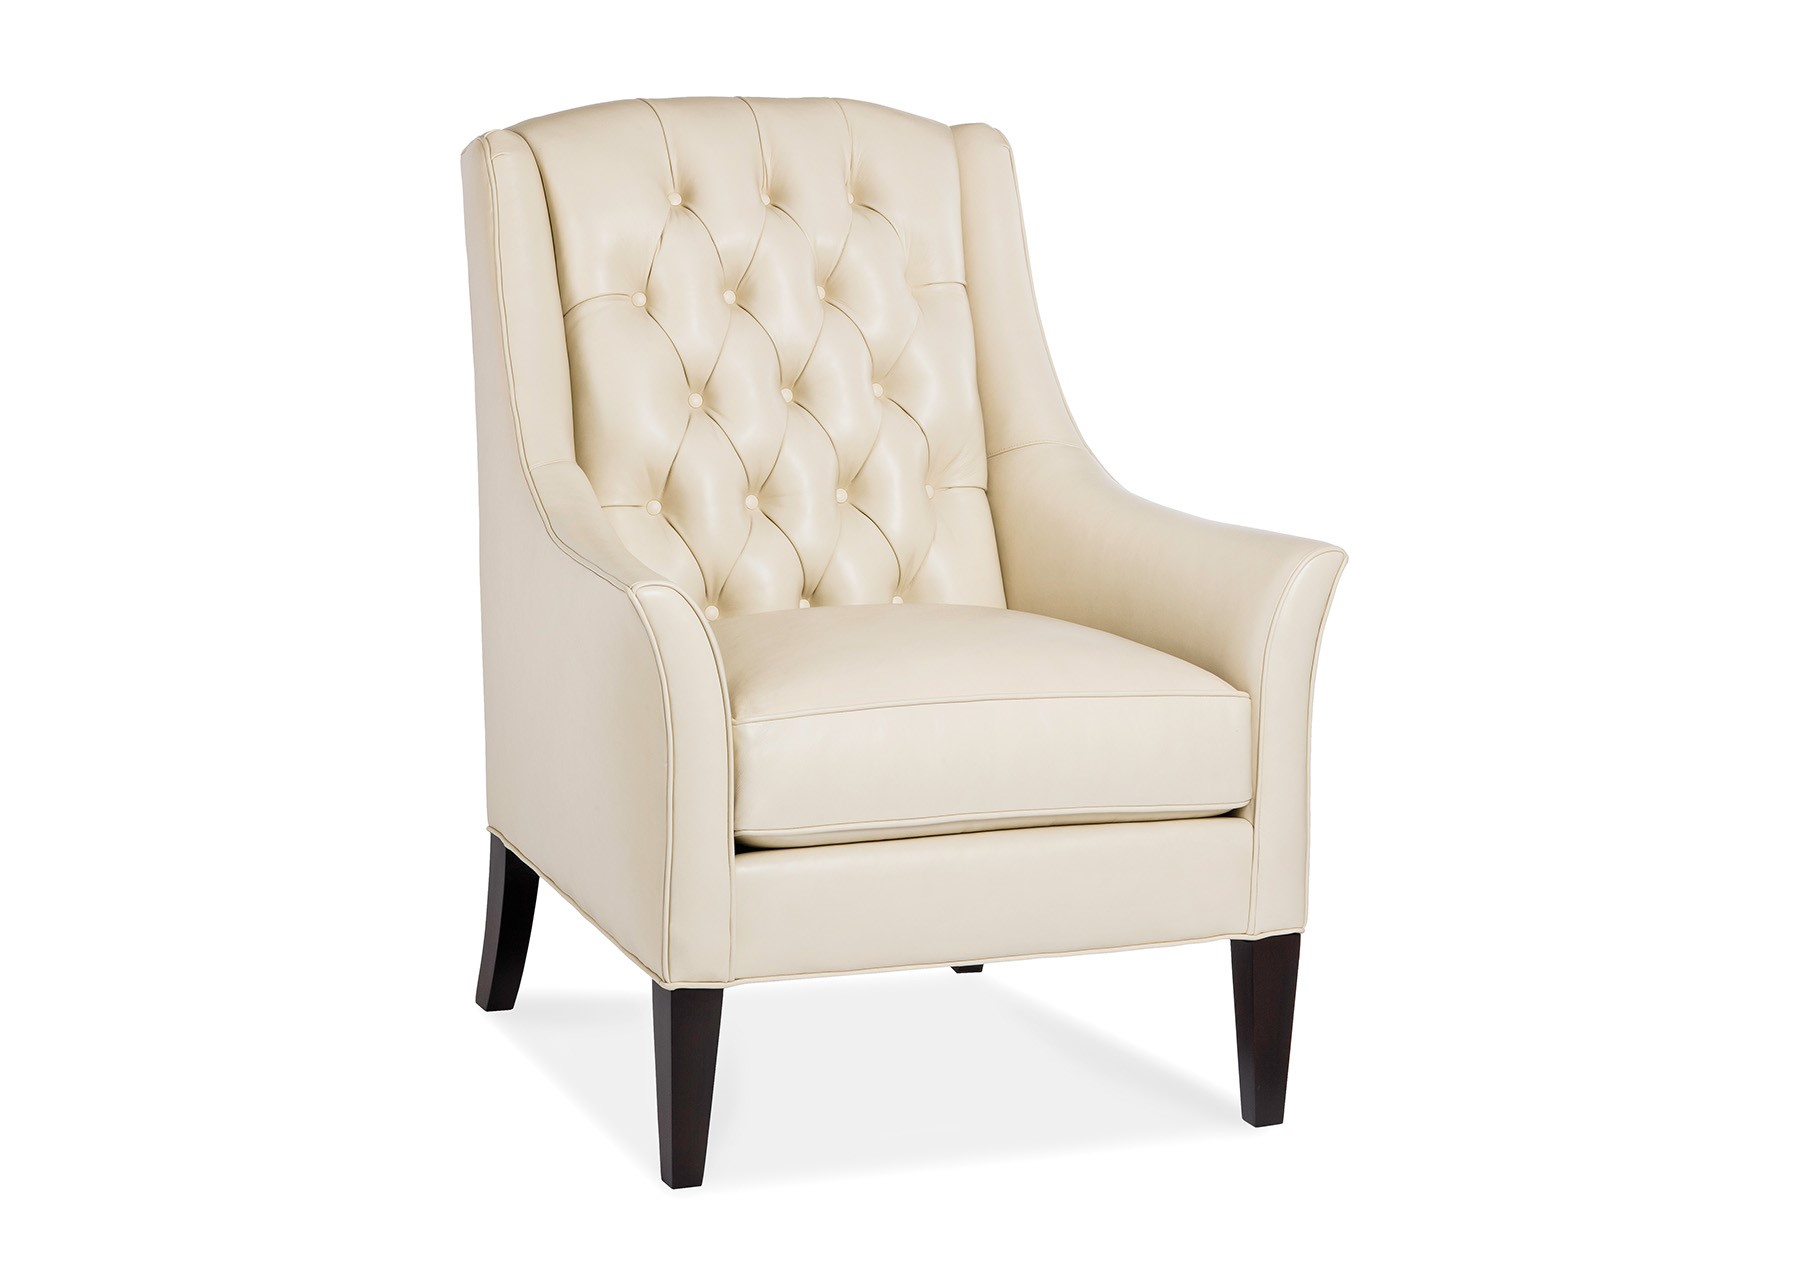 LANEY TUFTED CHAIR